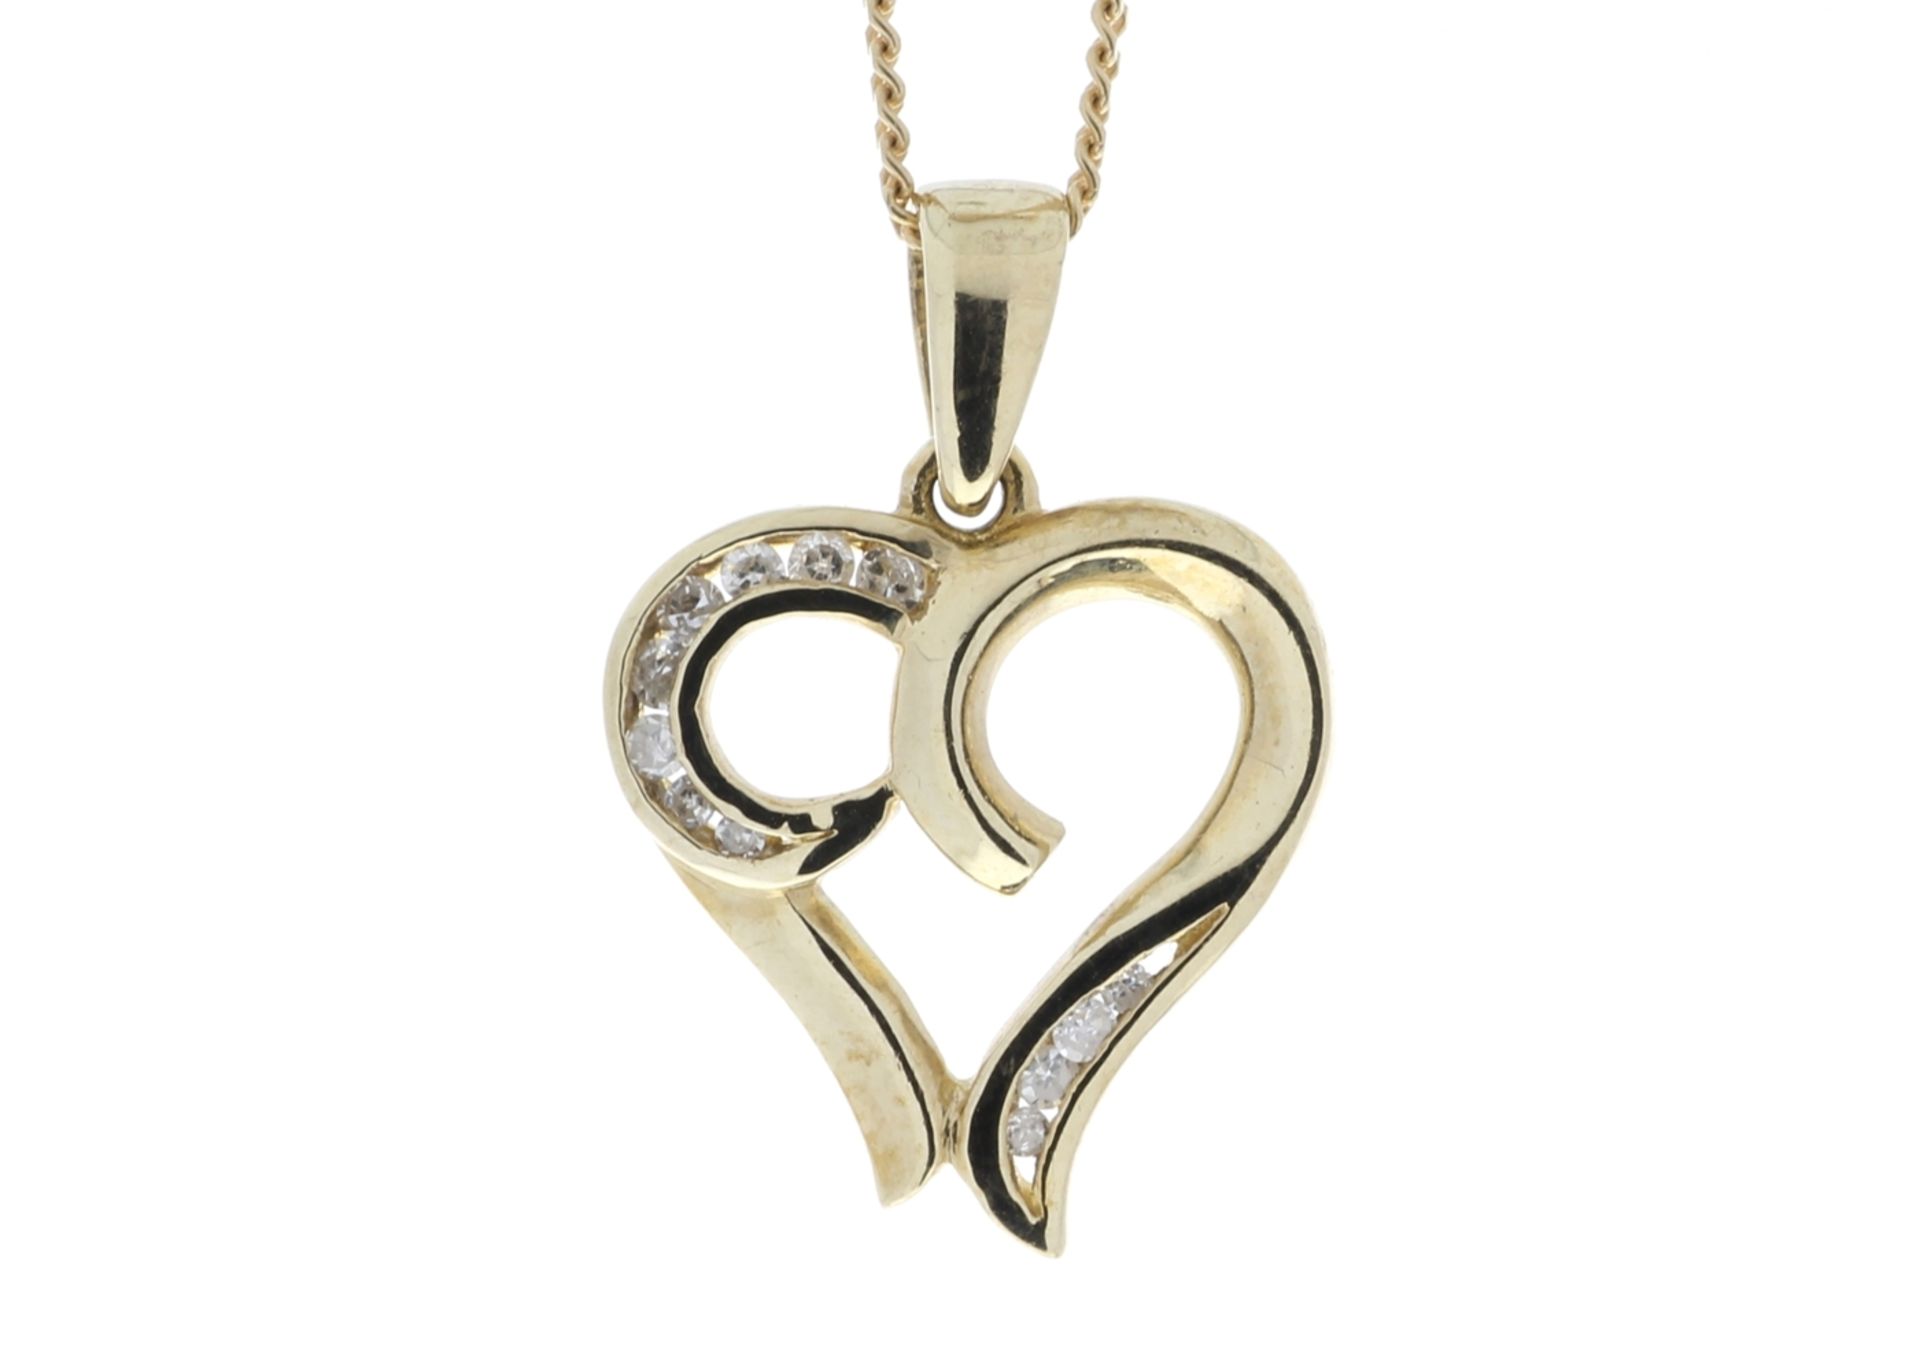 9ct Yellow Gold Heart Pendant with Diamonds in Top & Bottom Corner Swirls 0.10 Carats - Valued by